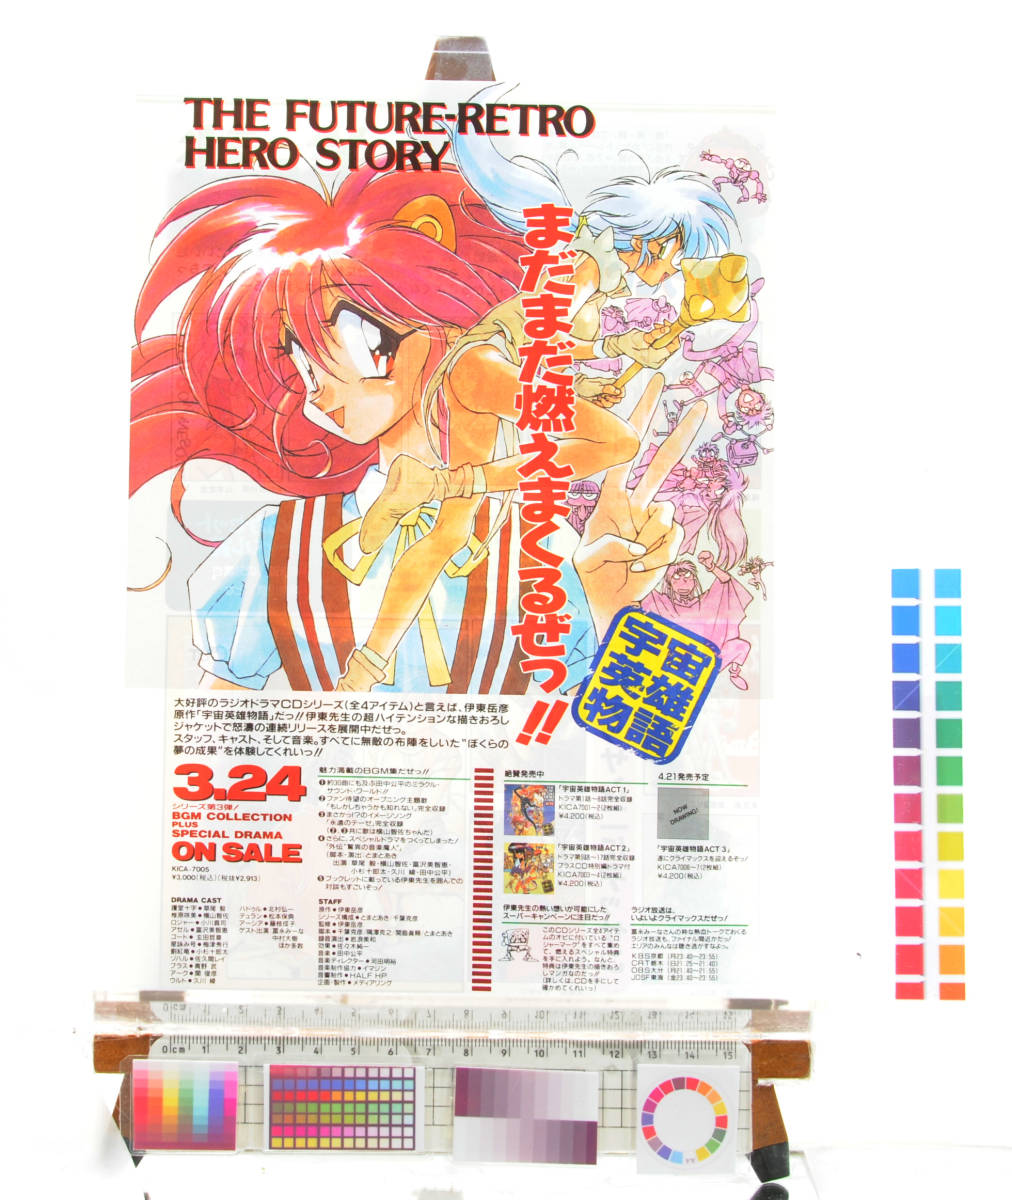 [Delivery Free]1980s- Anime Magazine Piece of Paper Space Hero Story CD Sales Announcement)宇宙英雄物語 CD販売告知 伊東岳彦[tagNT]